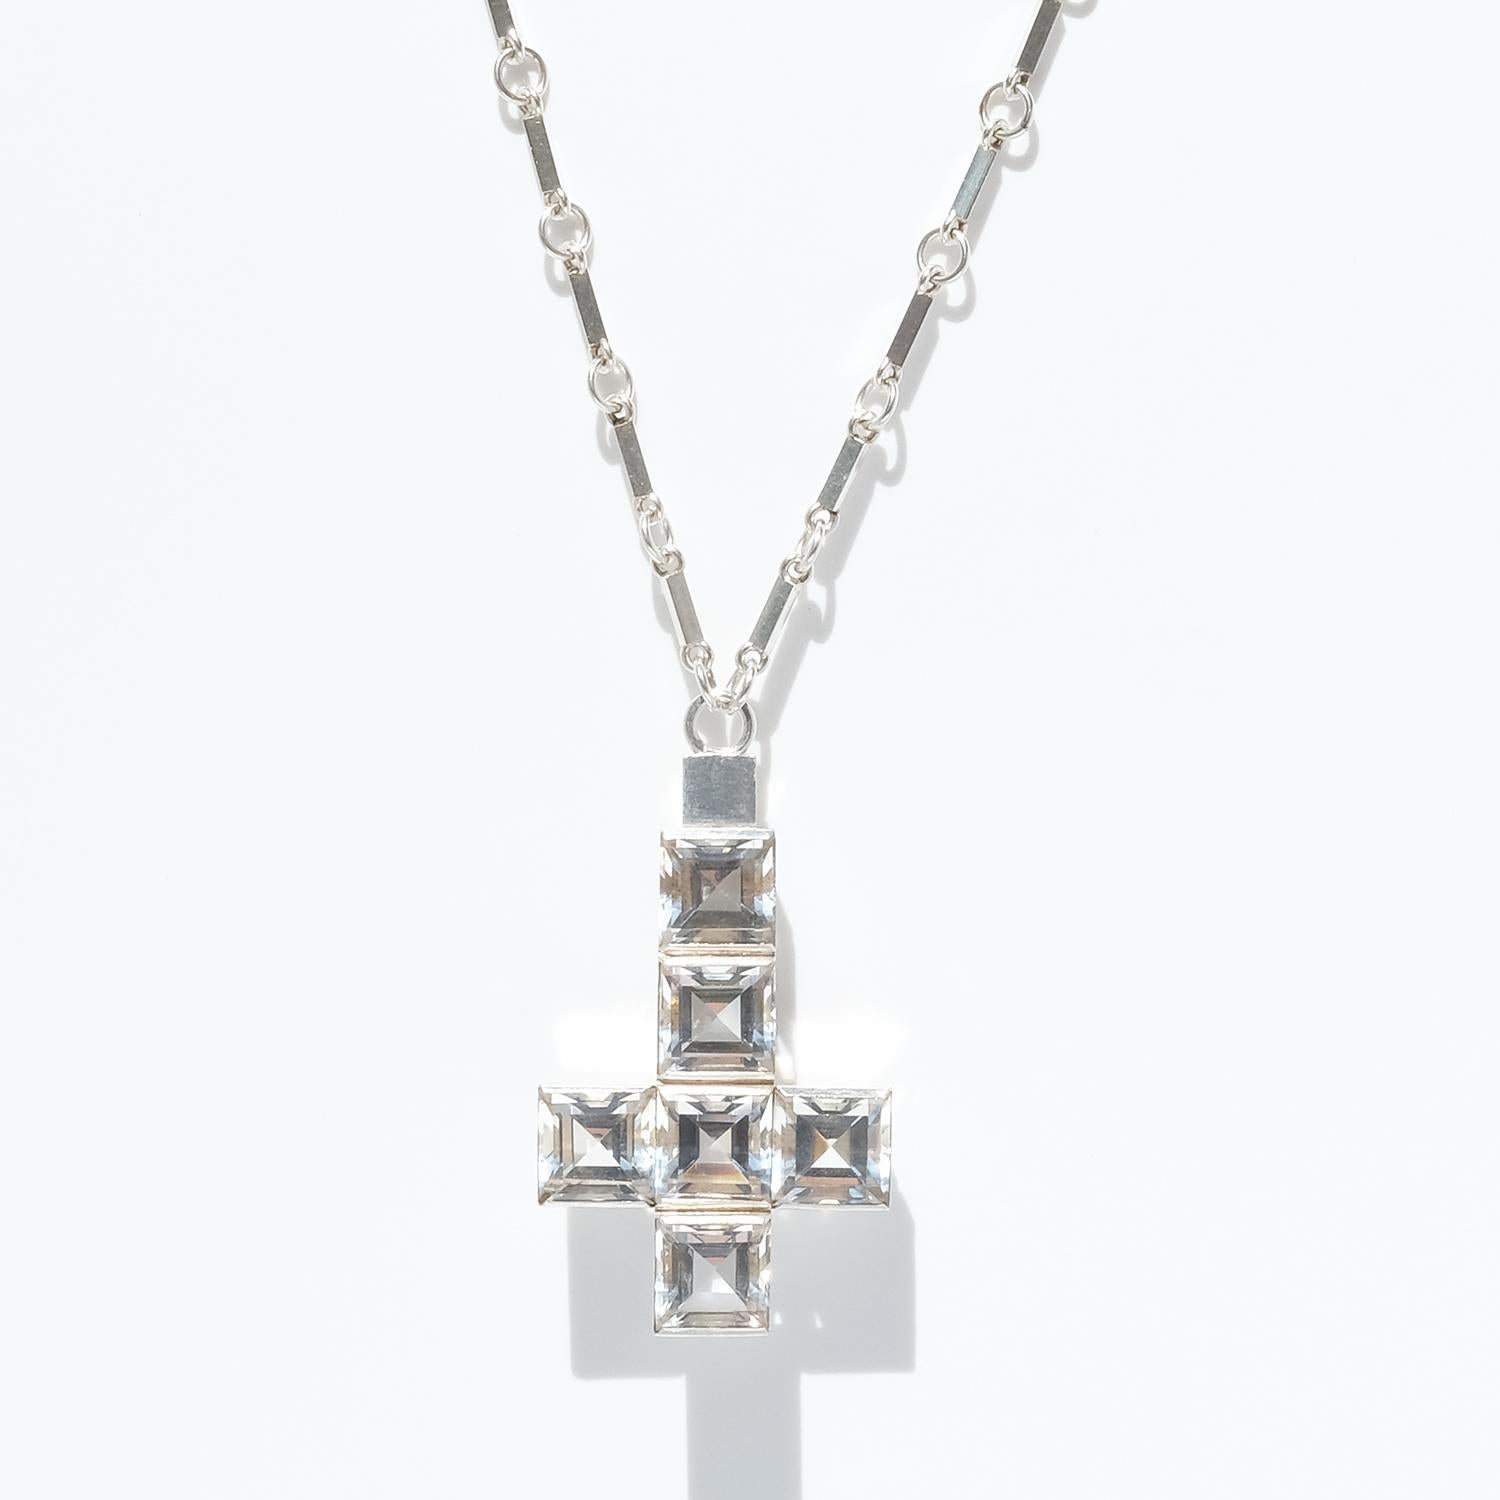 This sterling silver necklace shows upon typical Wiwen Nilsson characteristics; the geometric lines, the clean-cuts, the modern design and brushed silver, the square faceted cut rock crystals and the ring and bar chain.  

The only way to describe